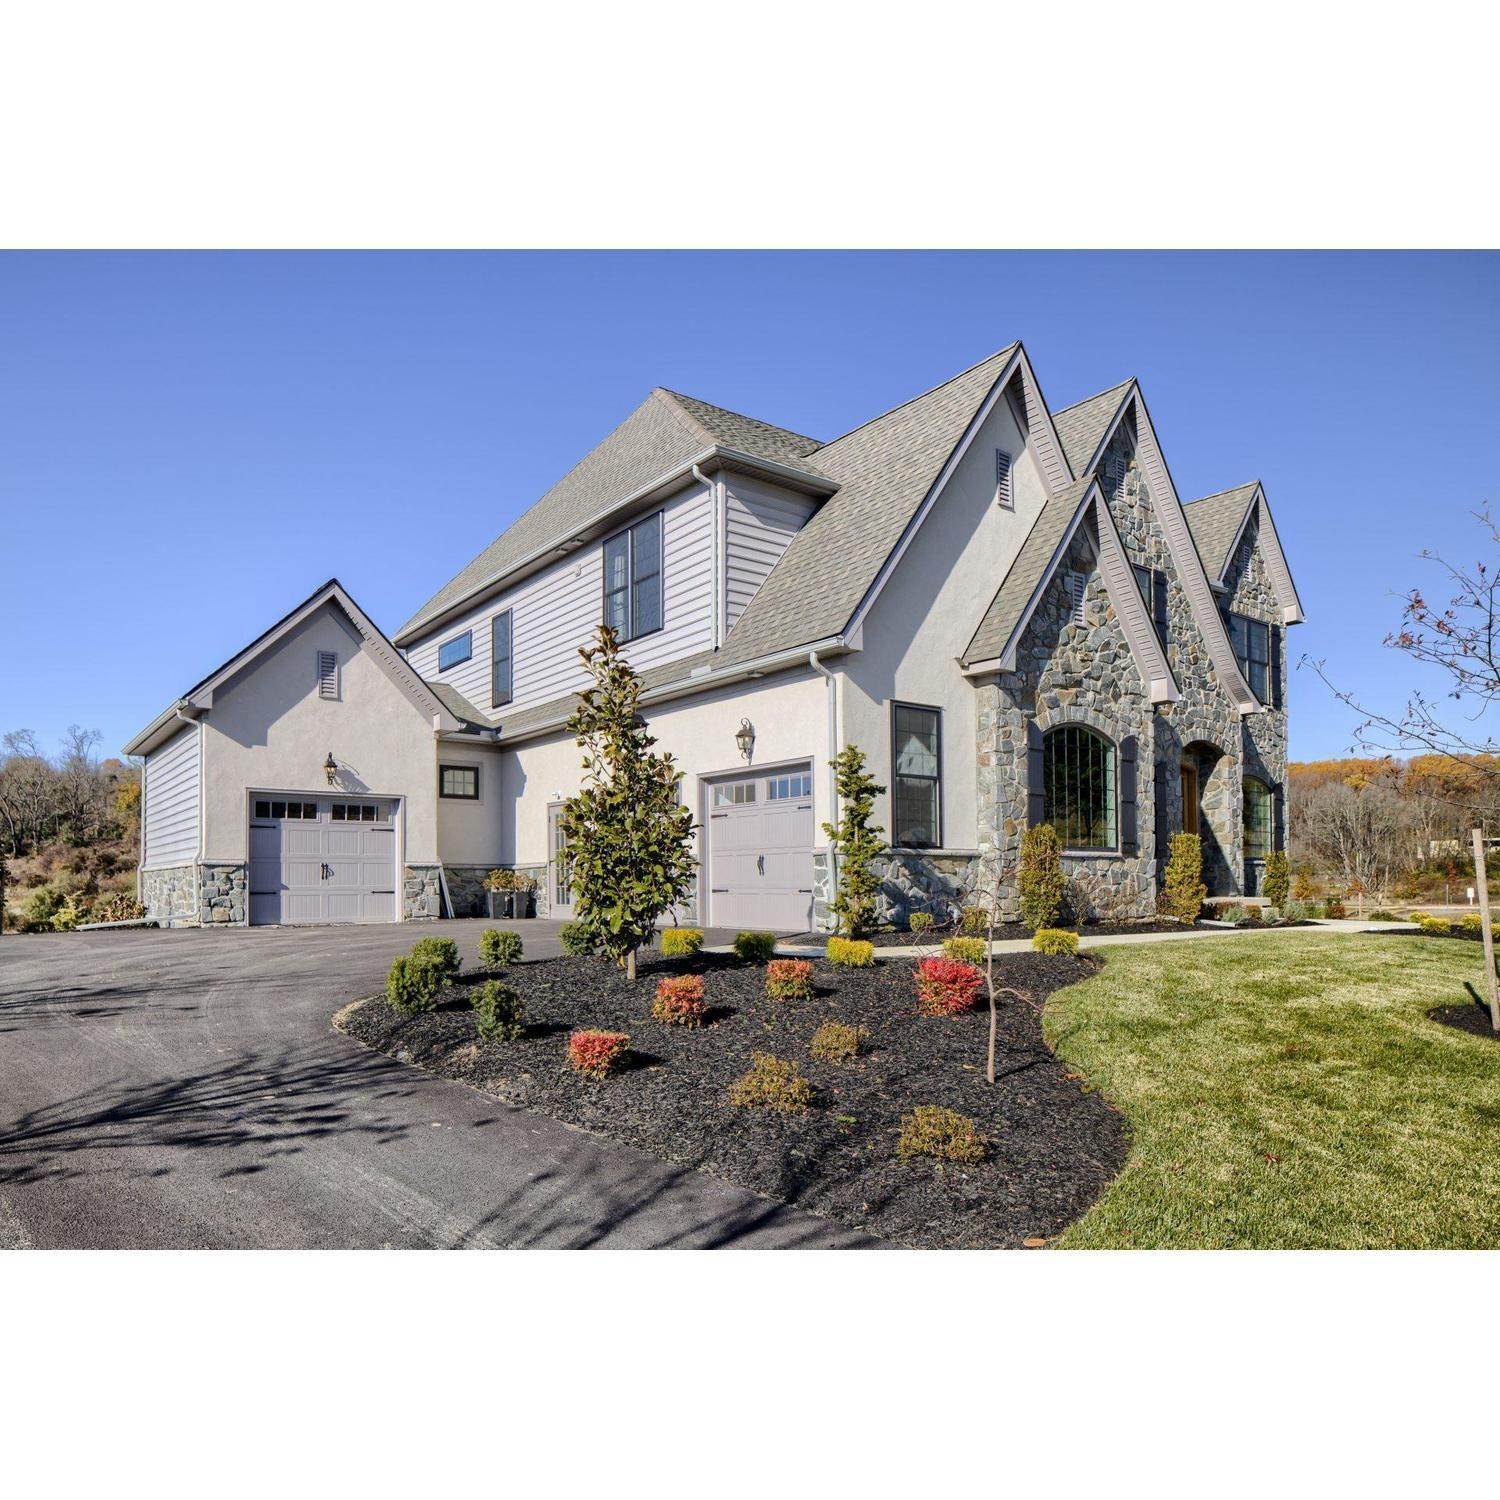 7. 101 Parkview Way, Newtown Square, PA 19073에 Ventry at Edgmont Preserve 건물